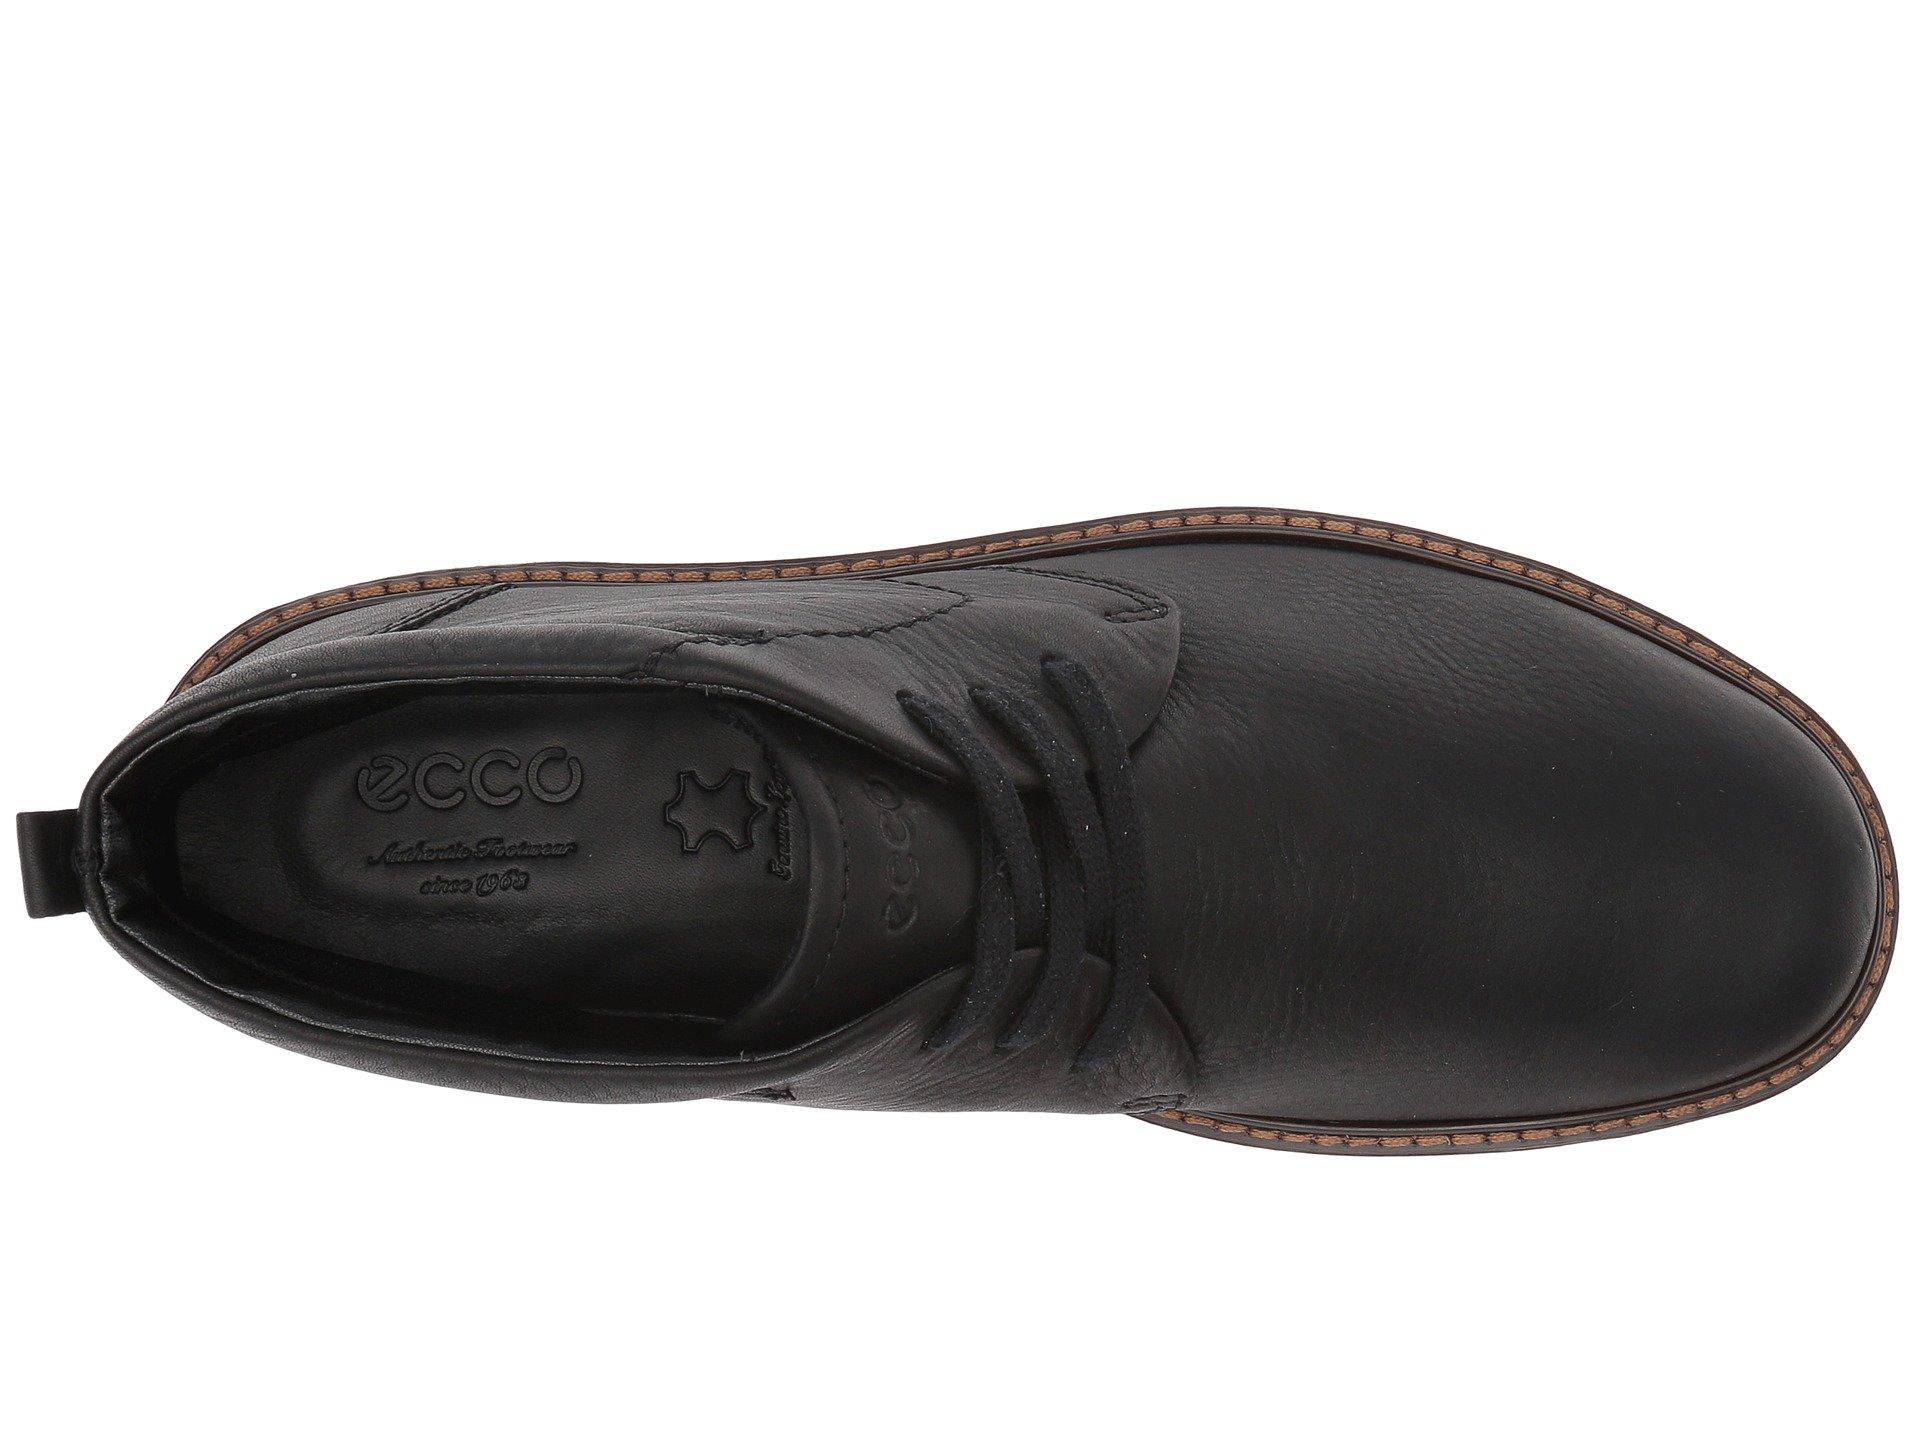 Ecco Leather Turn Gore-tex in Black for Men - Lyst